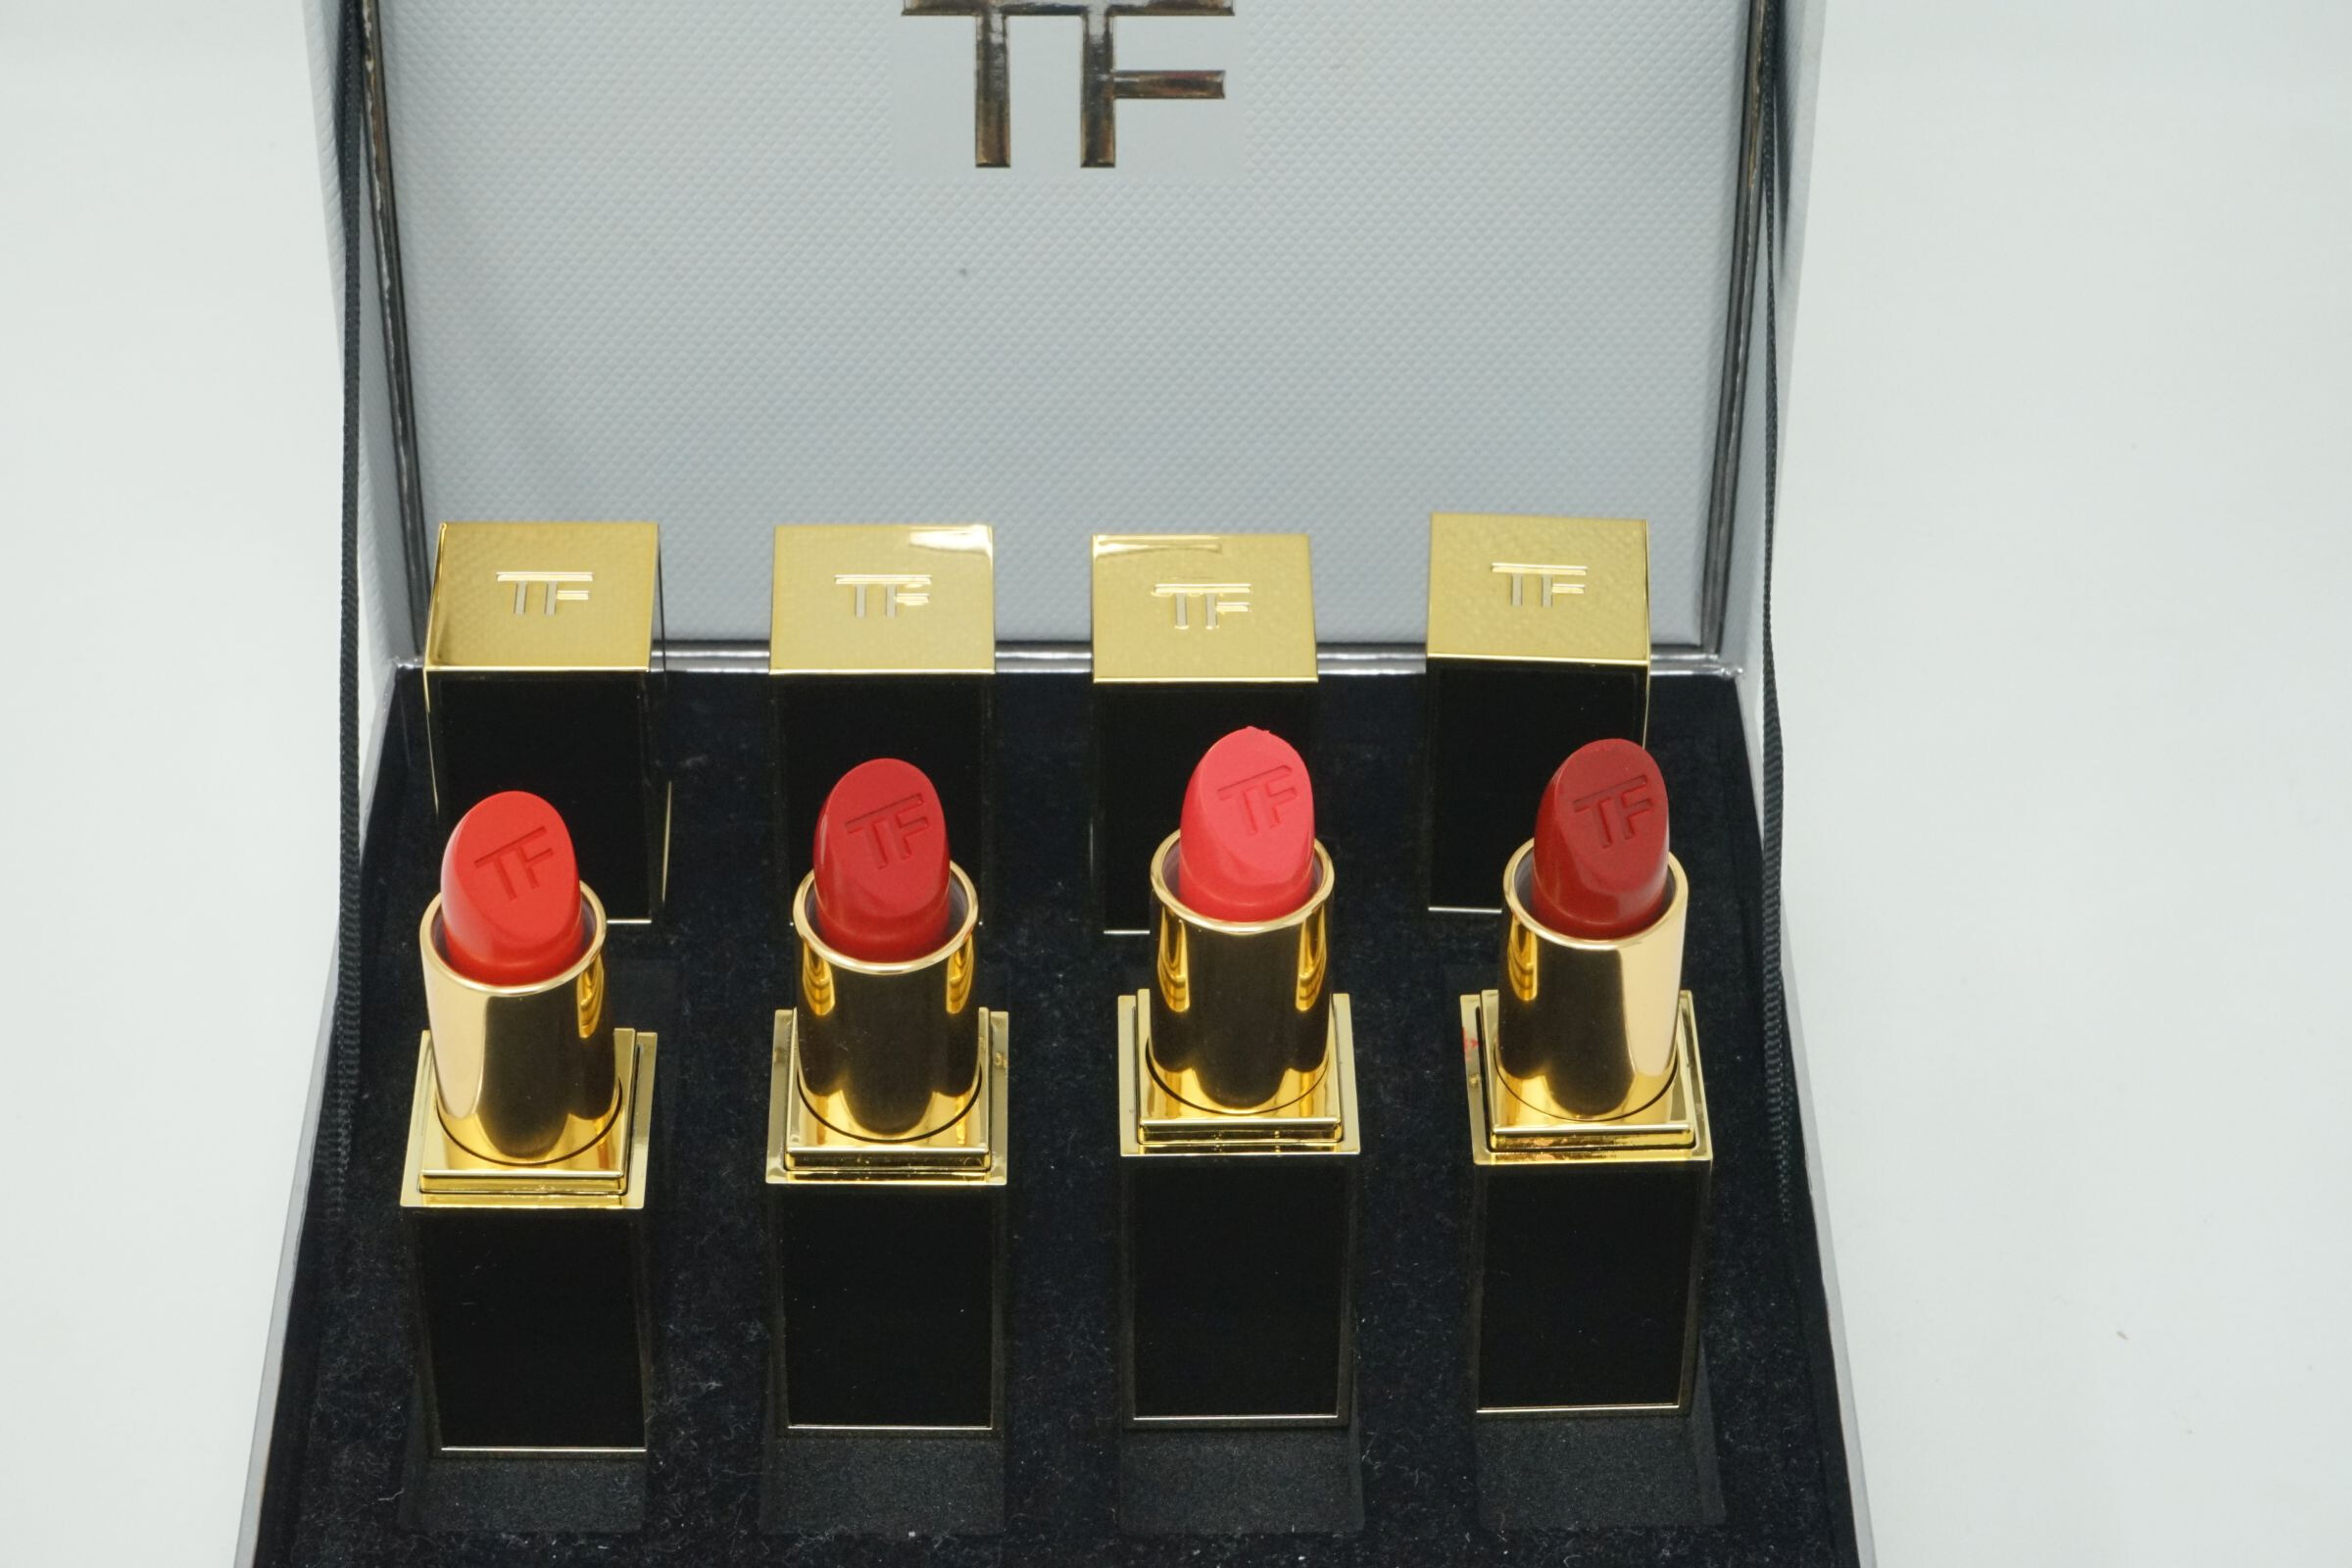 Tom Ford Lip Color Set 09 True Coral + 16 Scarlet Rouge + 06 Flame + 07 Ruby Rush